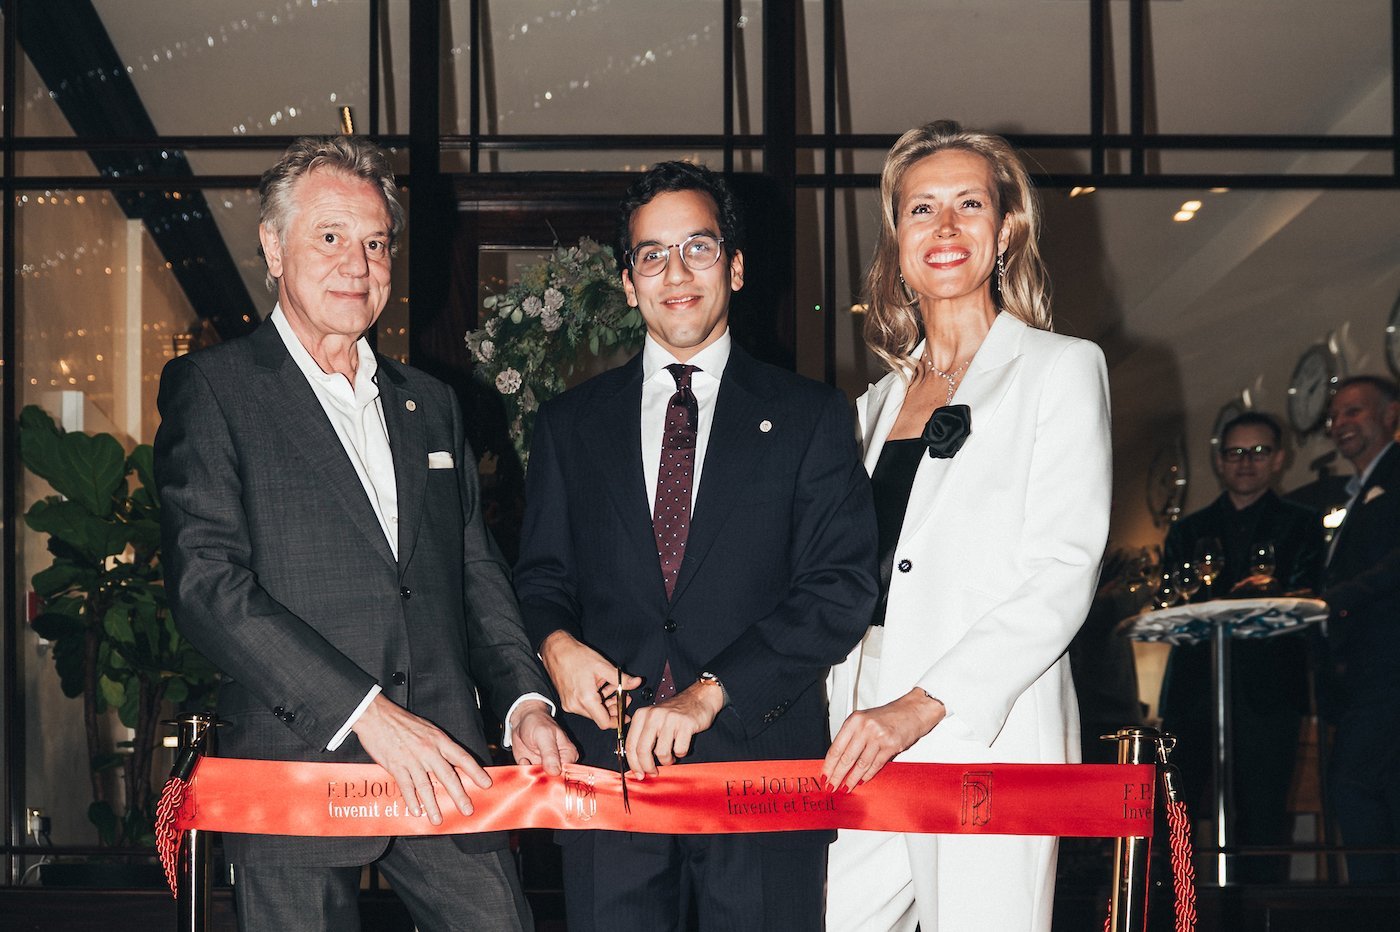 New F.P.Journe Boutique opens in London